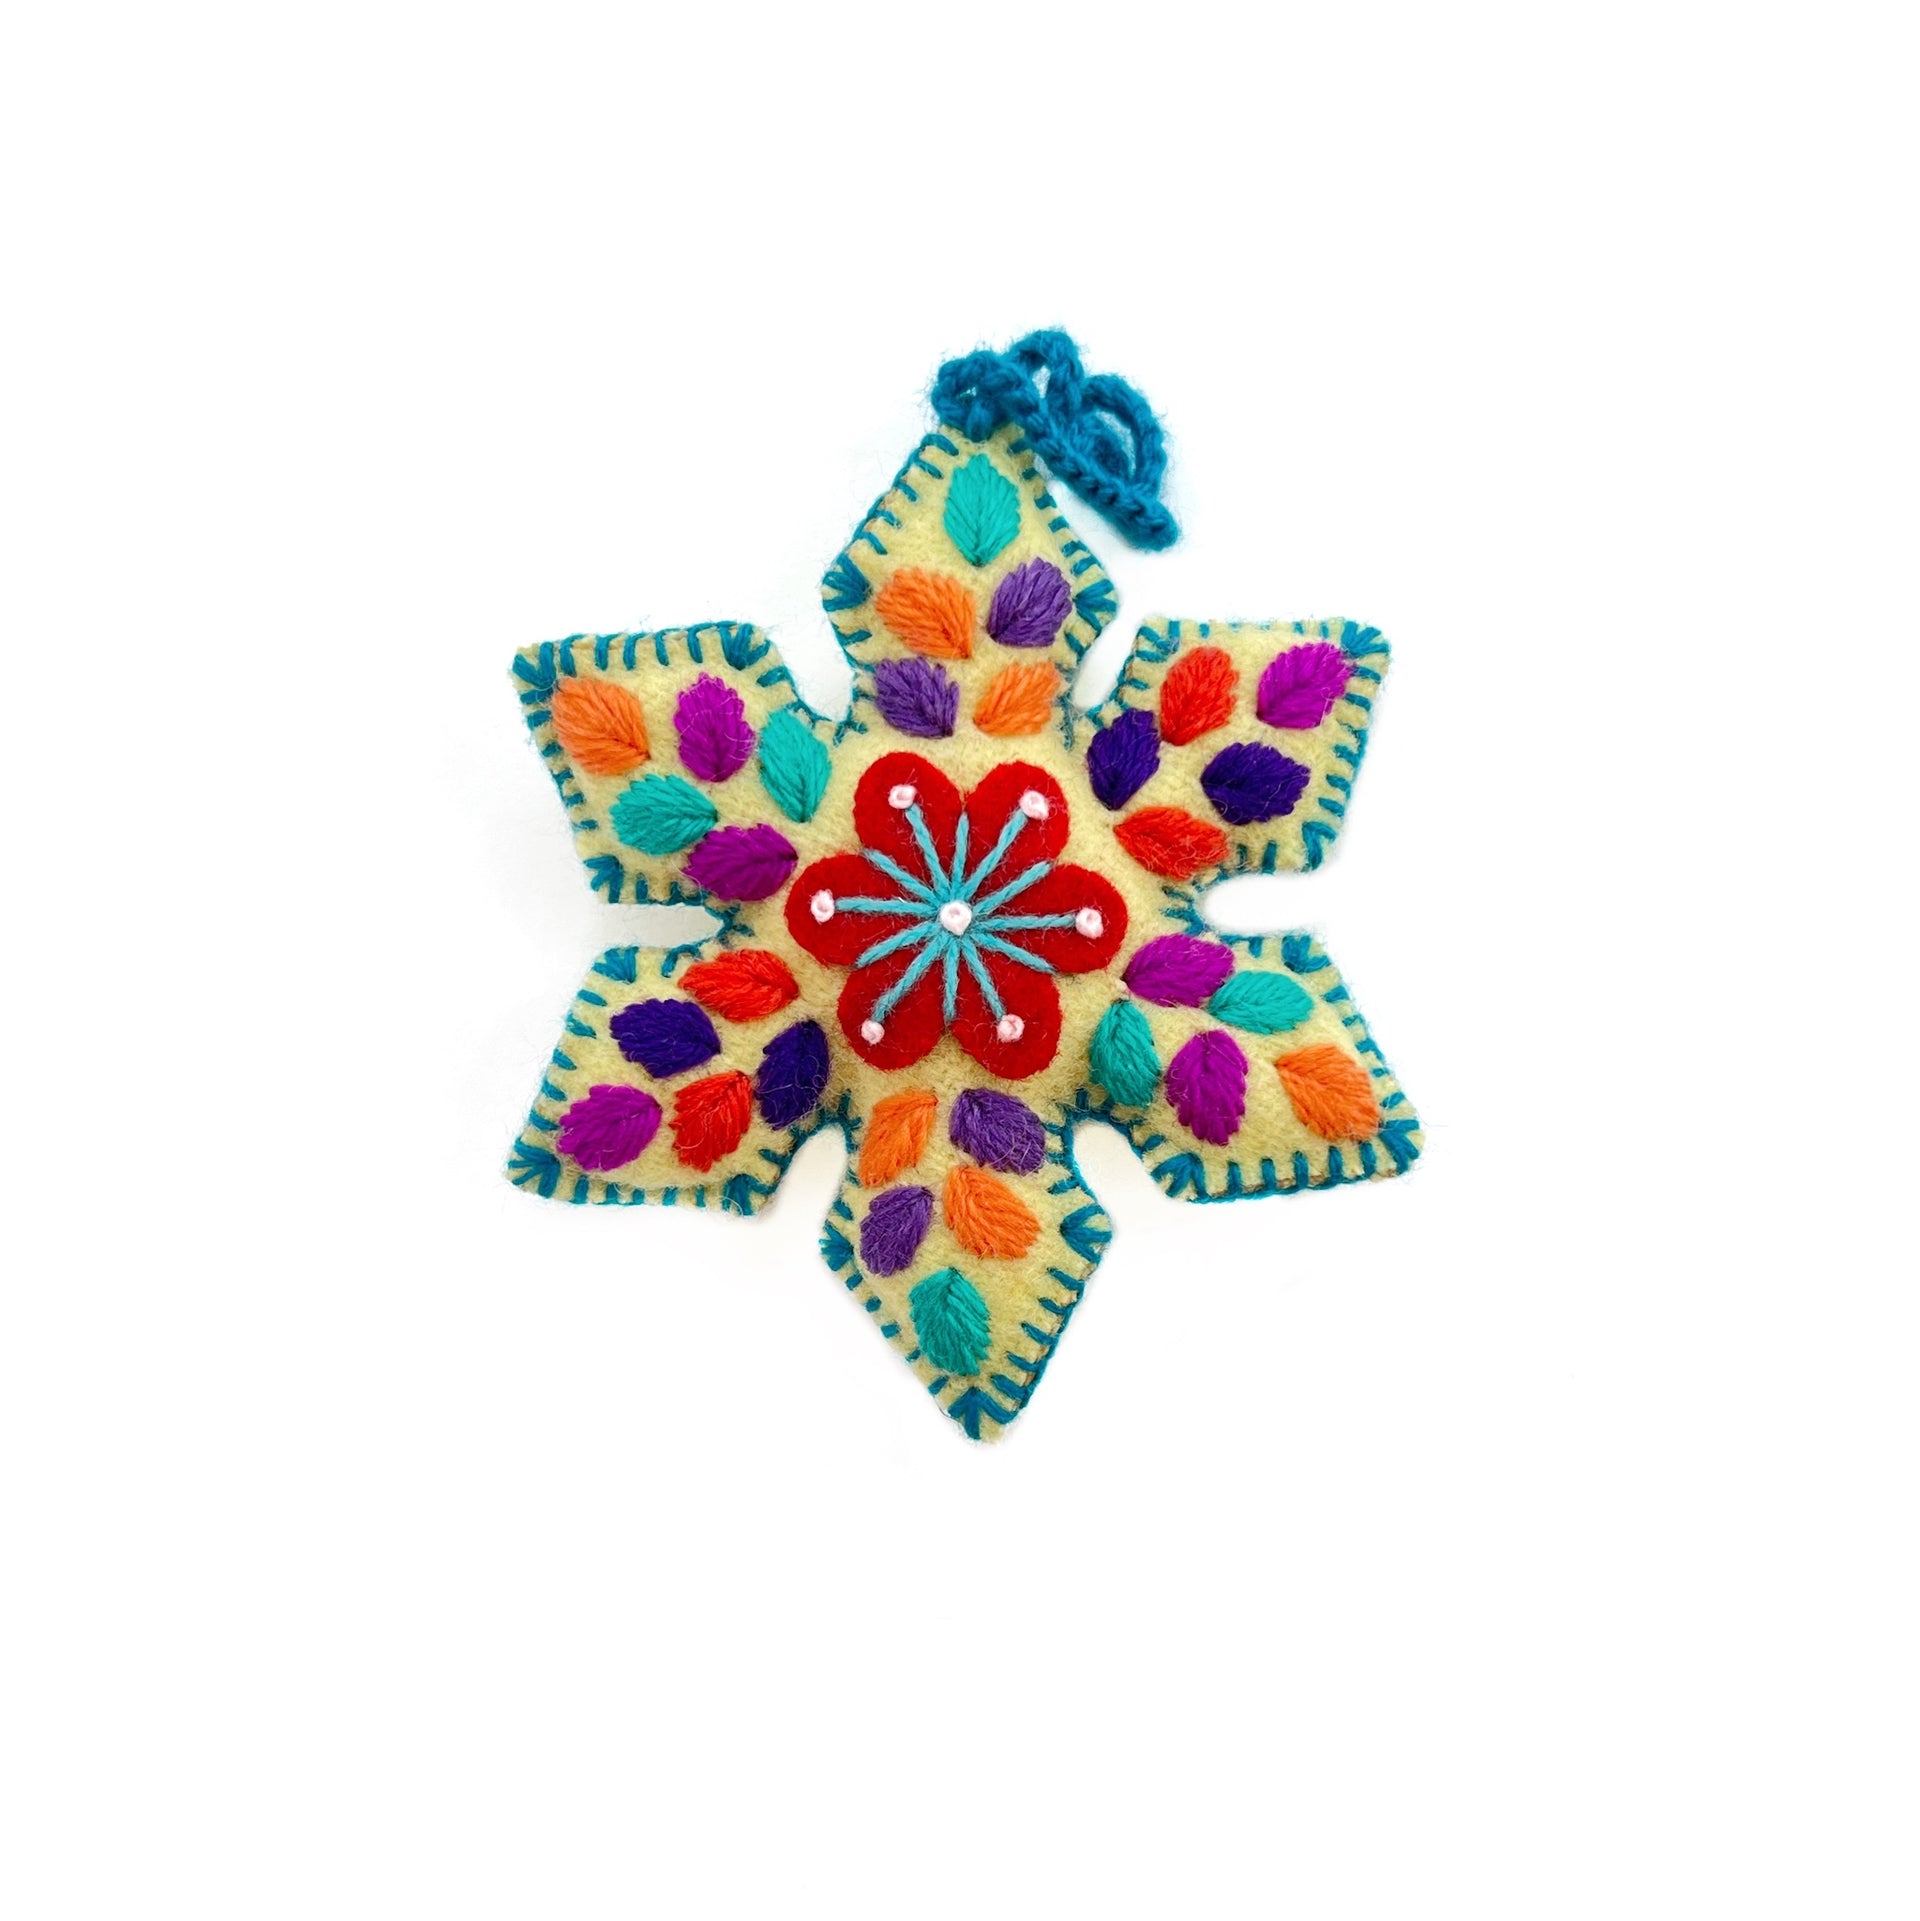 Colorful Snowflake Ornament, Multicolor Embroidered Wool